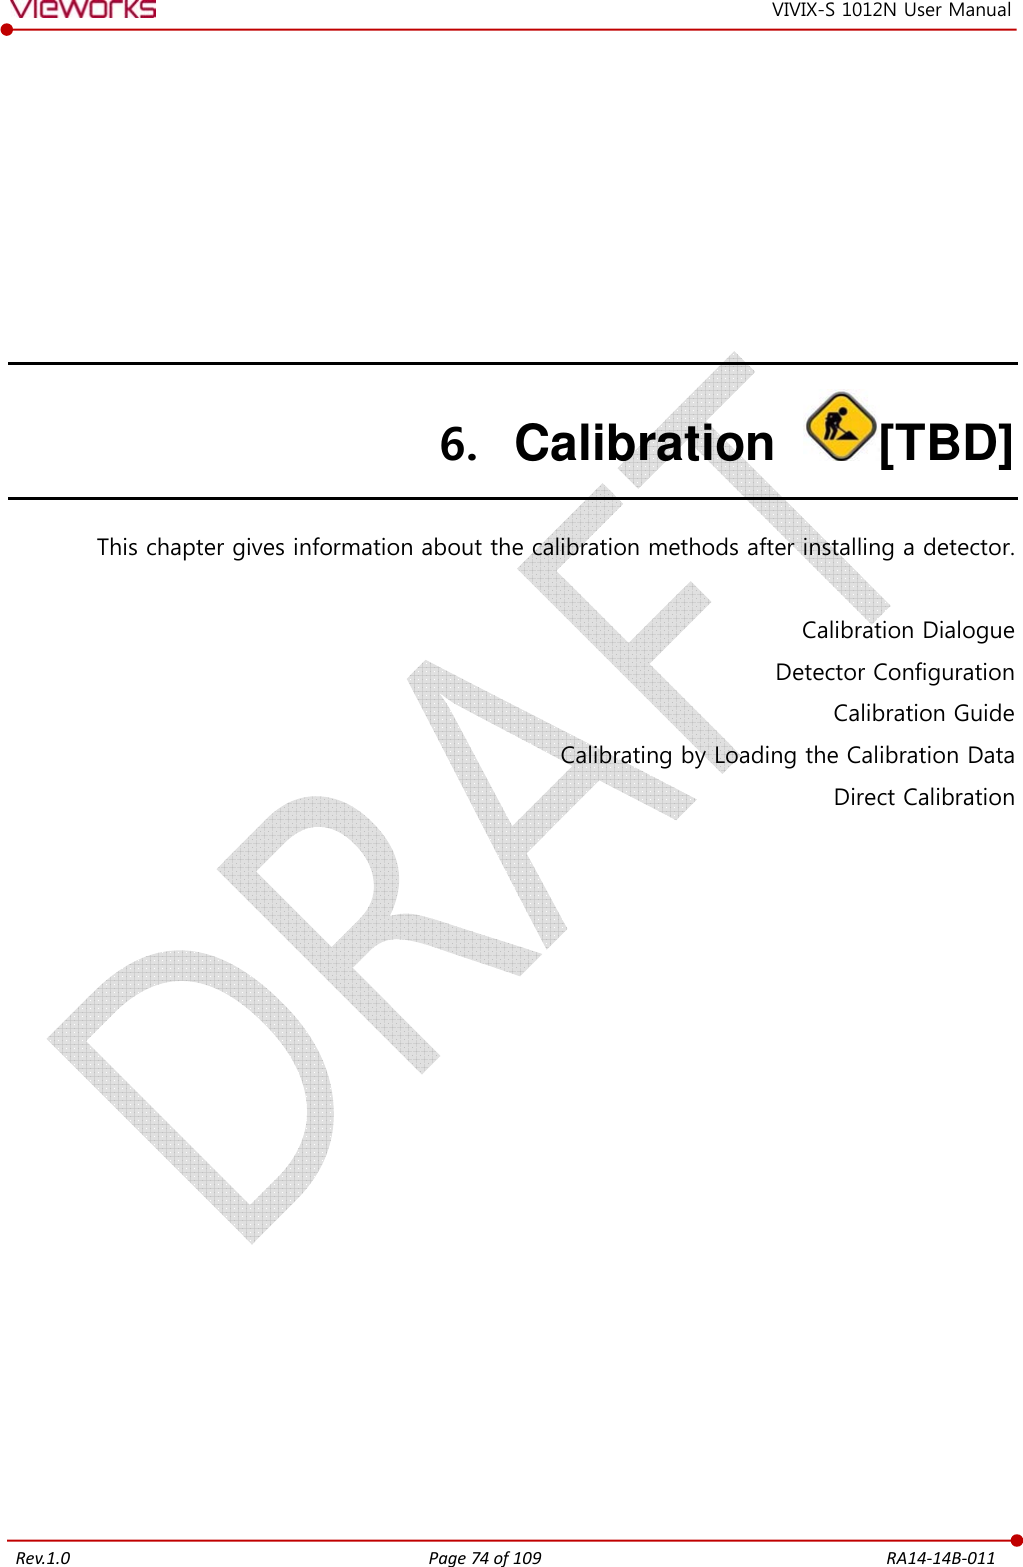   Rev.1.0 Page 74 of 109  RA14-14B-011 VIVIX-S 1012N User Manual 6. Calibration  [TBD] This chapter gives information about the calibration methods after installing a detector.  Calibration Dialogue Detector Configuration Calibration Guide Calibrating by Loading the Calibration Data Direct Calibration   